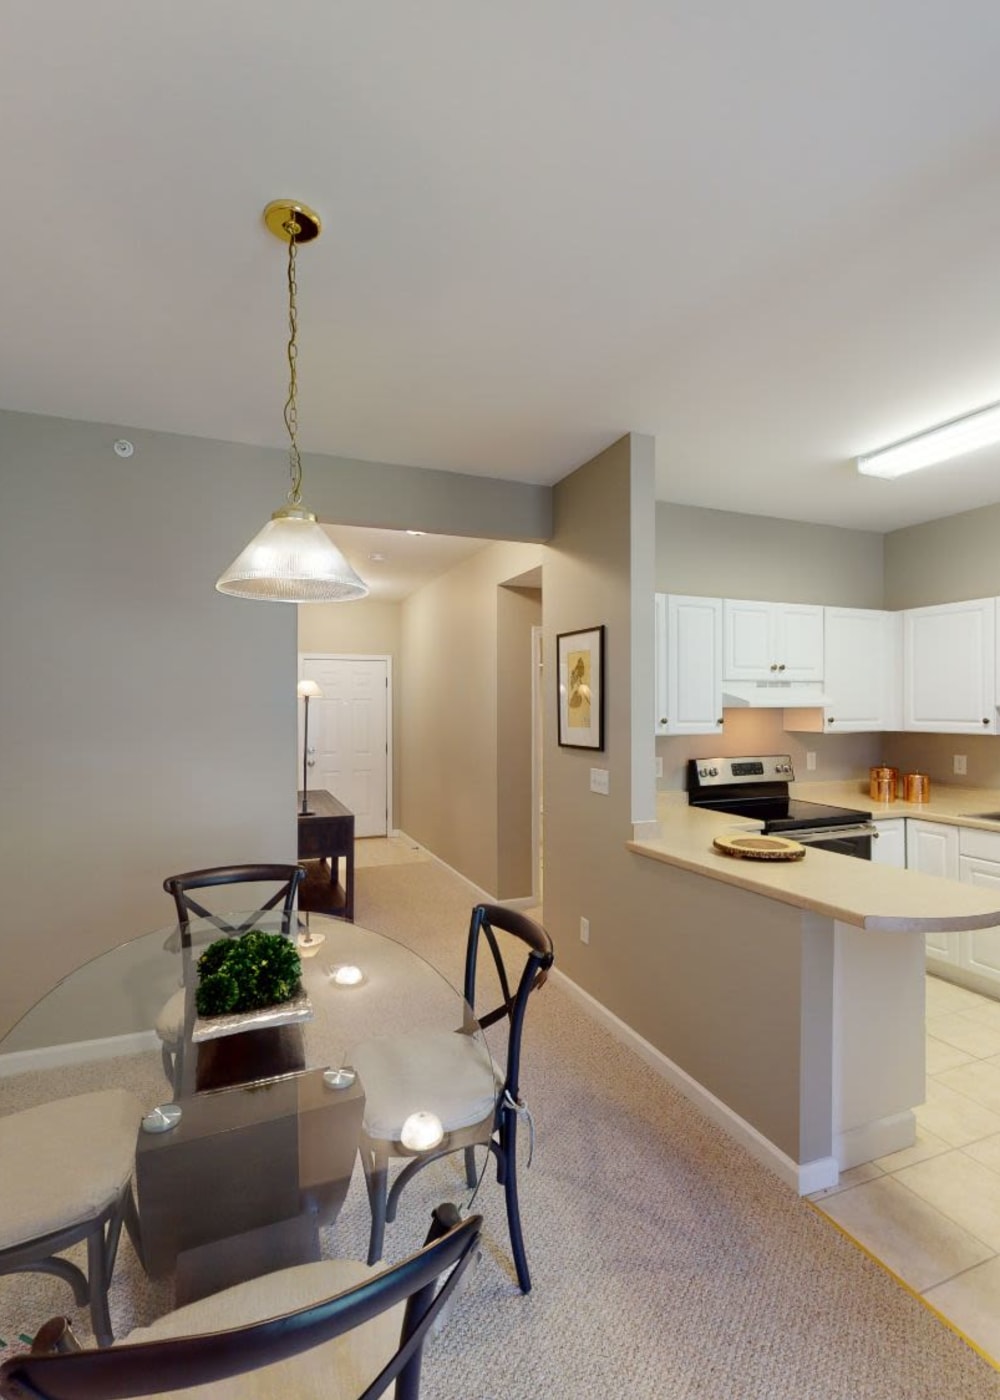 Kitchen and Dining Room at Park Lane Apartments in Depew, New York